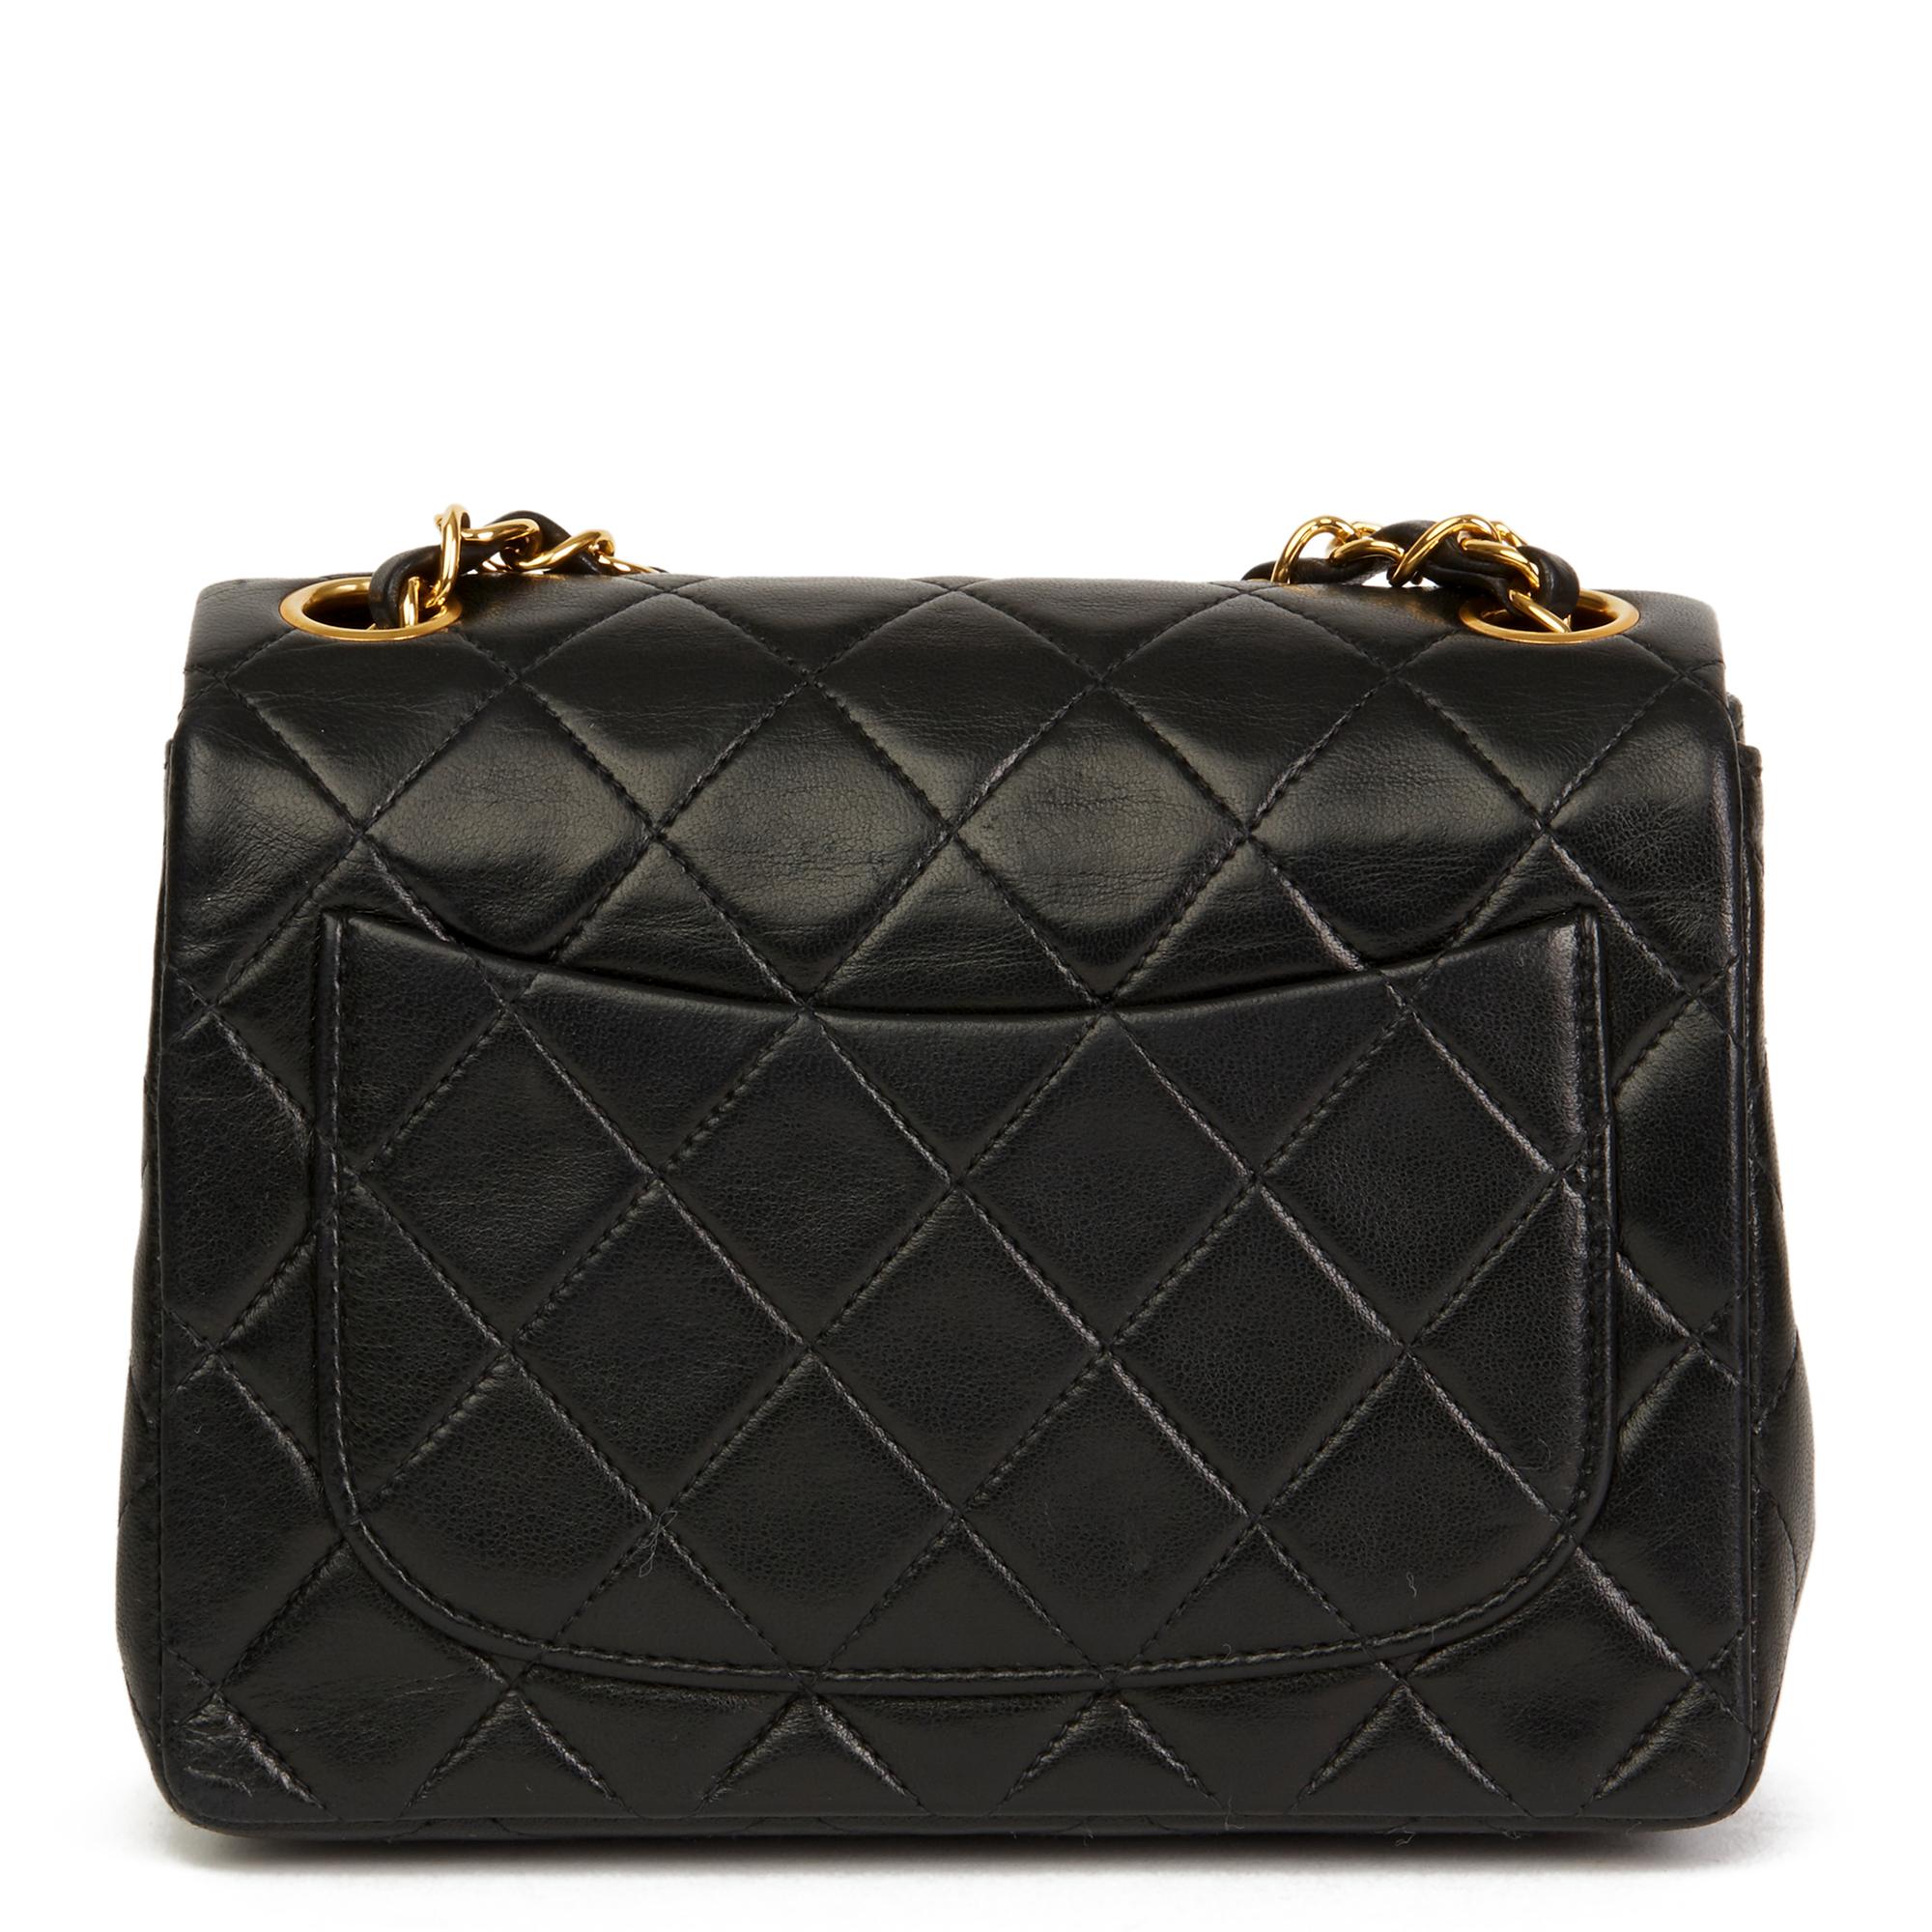 1991 Chanel Black Quilted Lambskin Vintage Mini Flap Bag 10